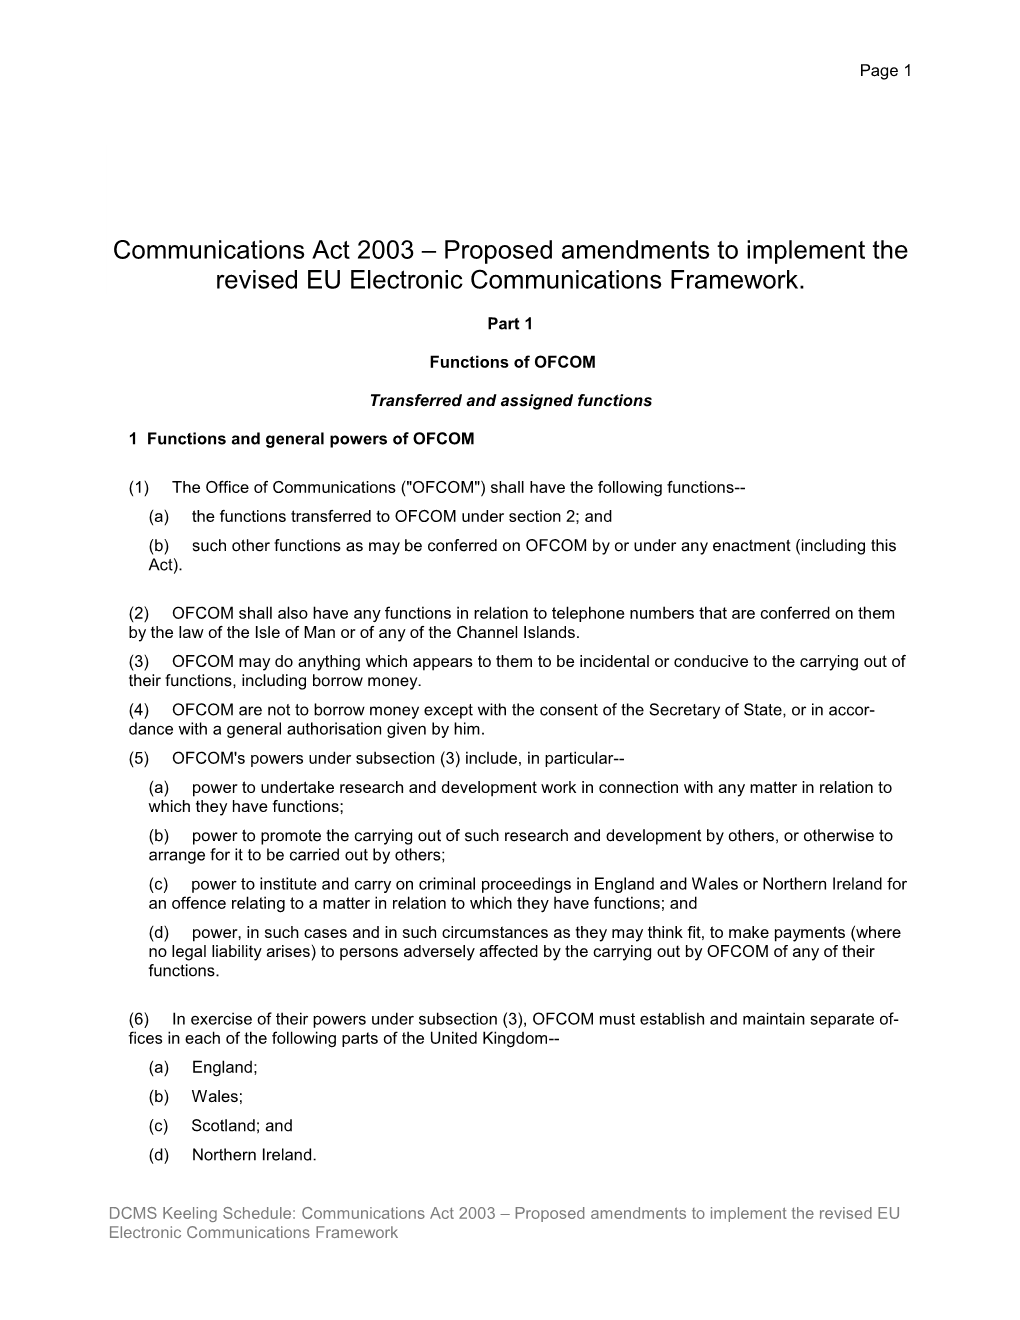 Amendments to the Communications Act 2003 to Implement